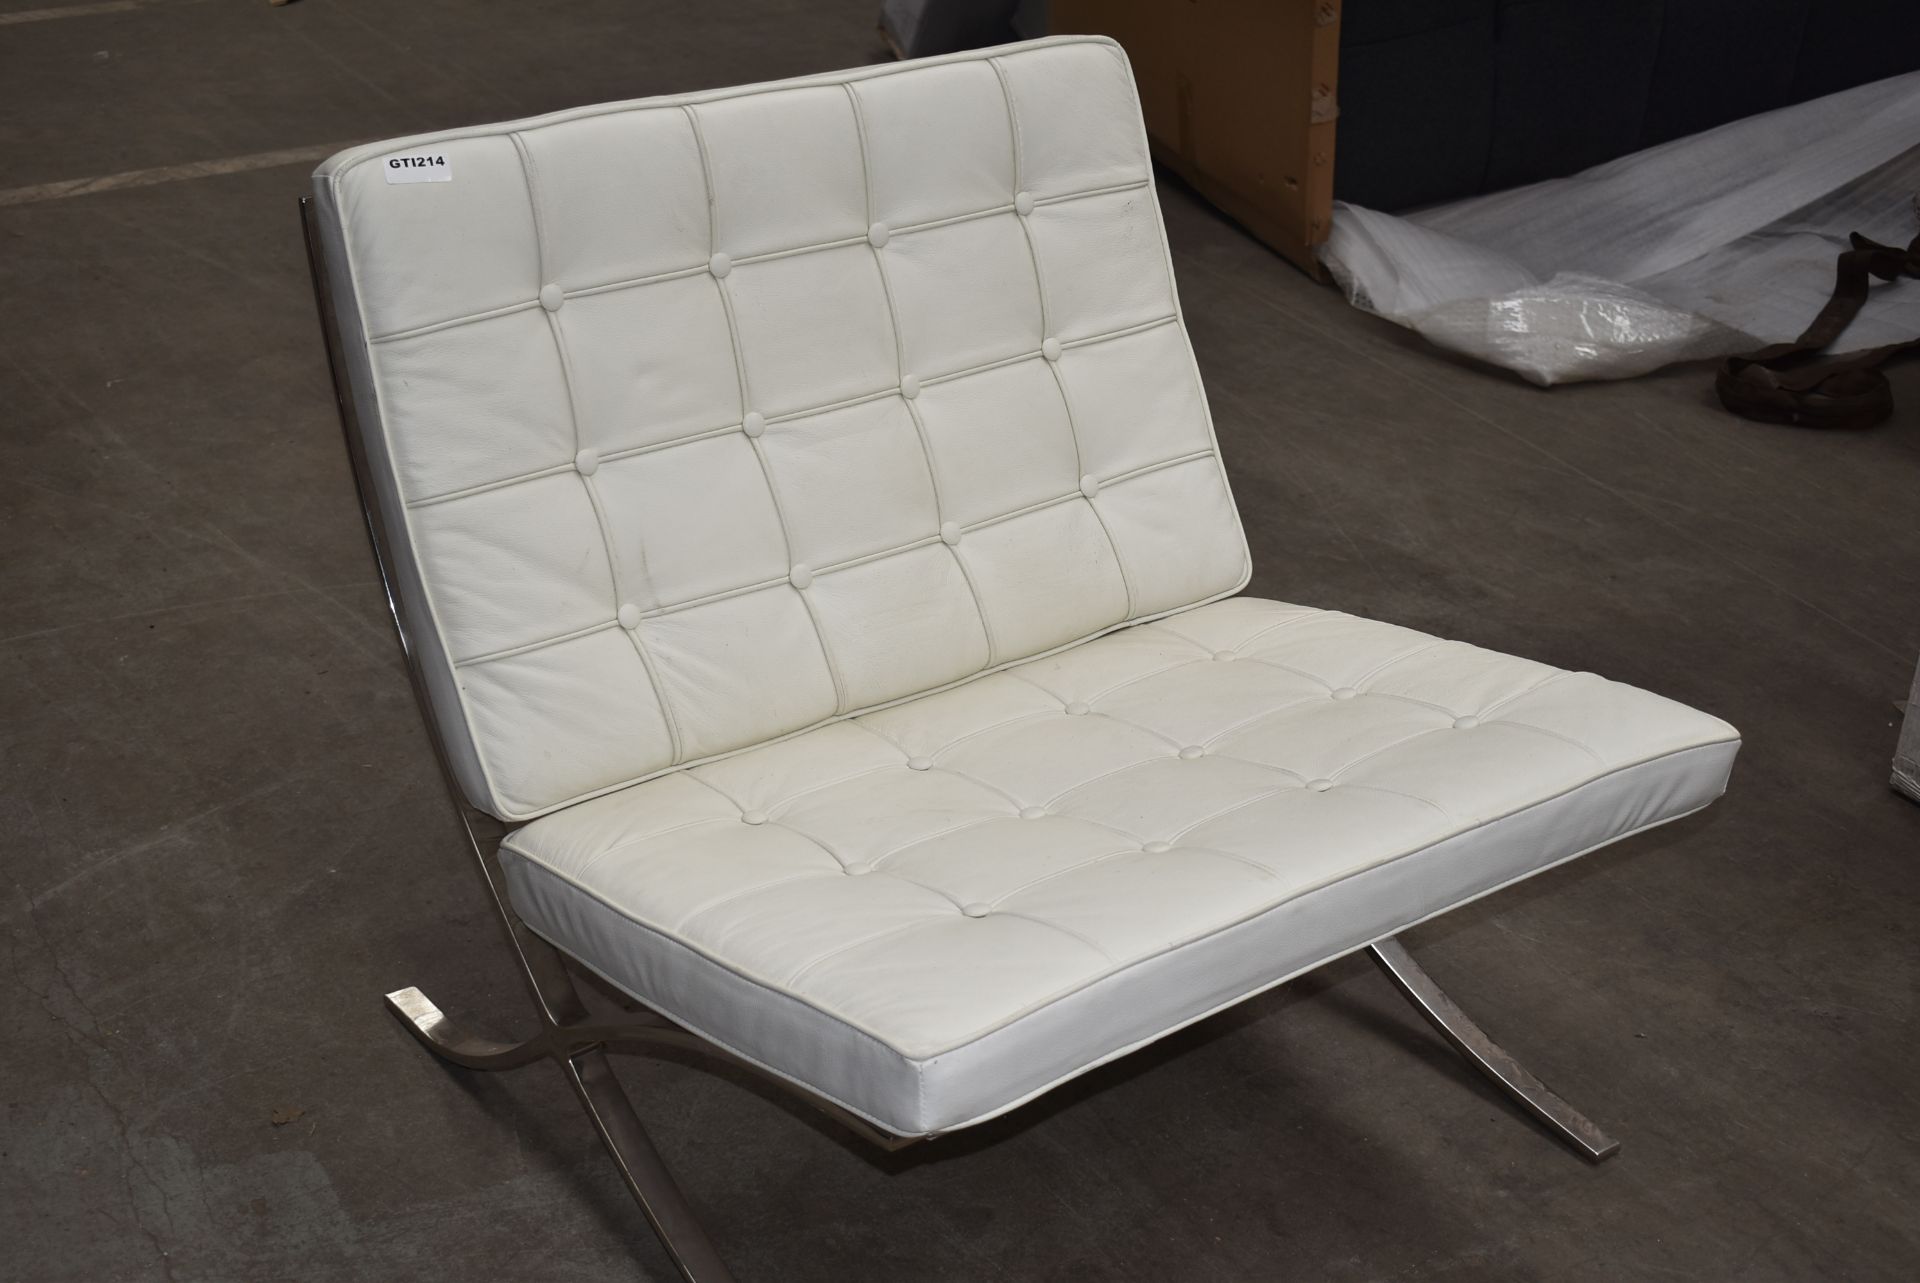 1 x Contemporary Lounge Chair With Strap Supports, Chrome Base and White Leather Studded Seat and - Image 9 of 9